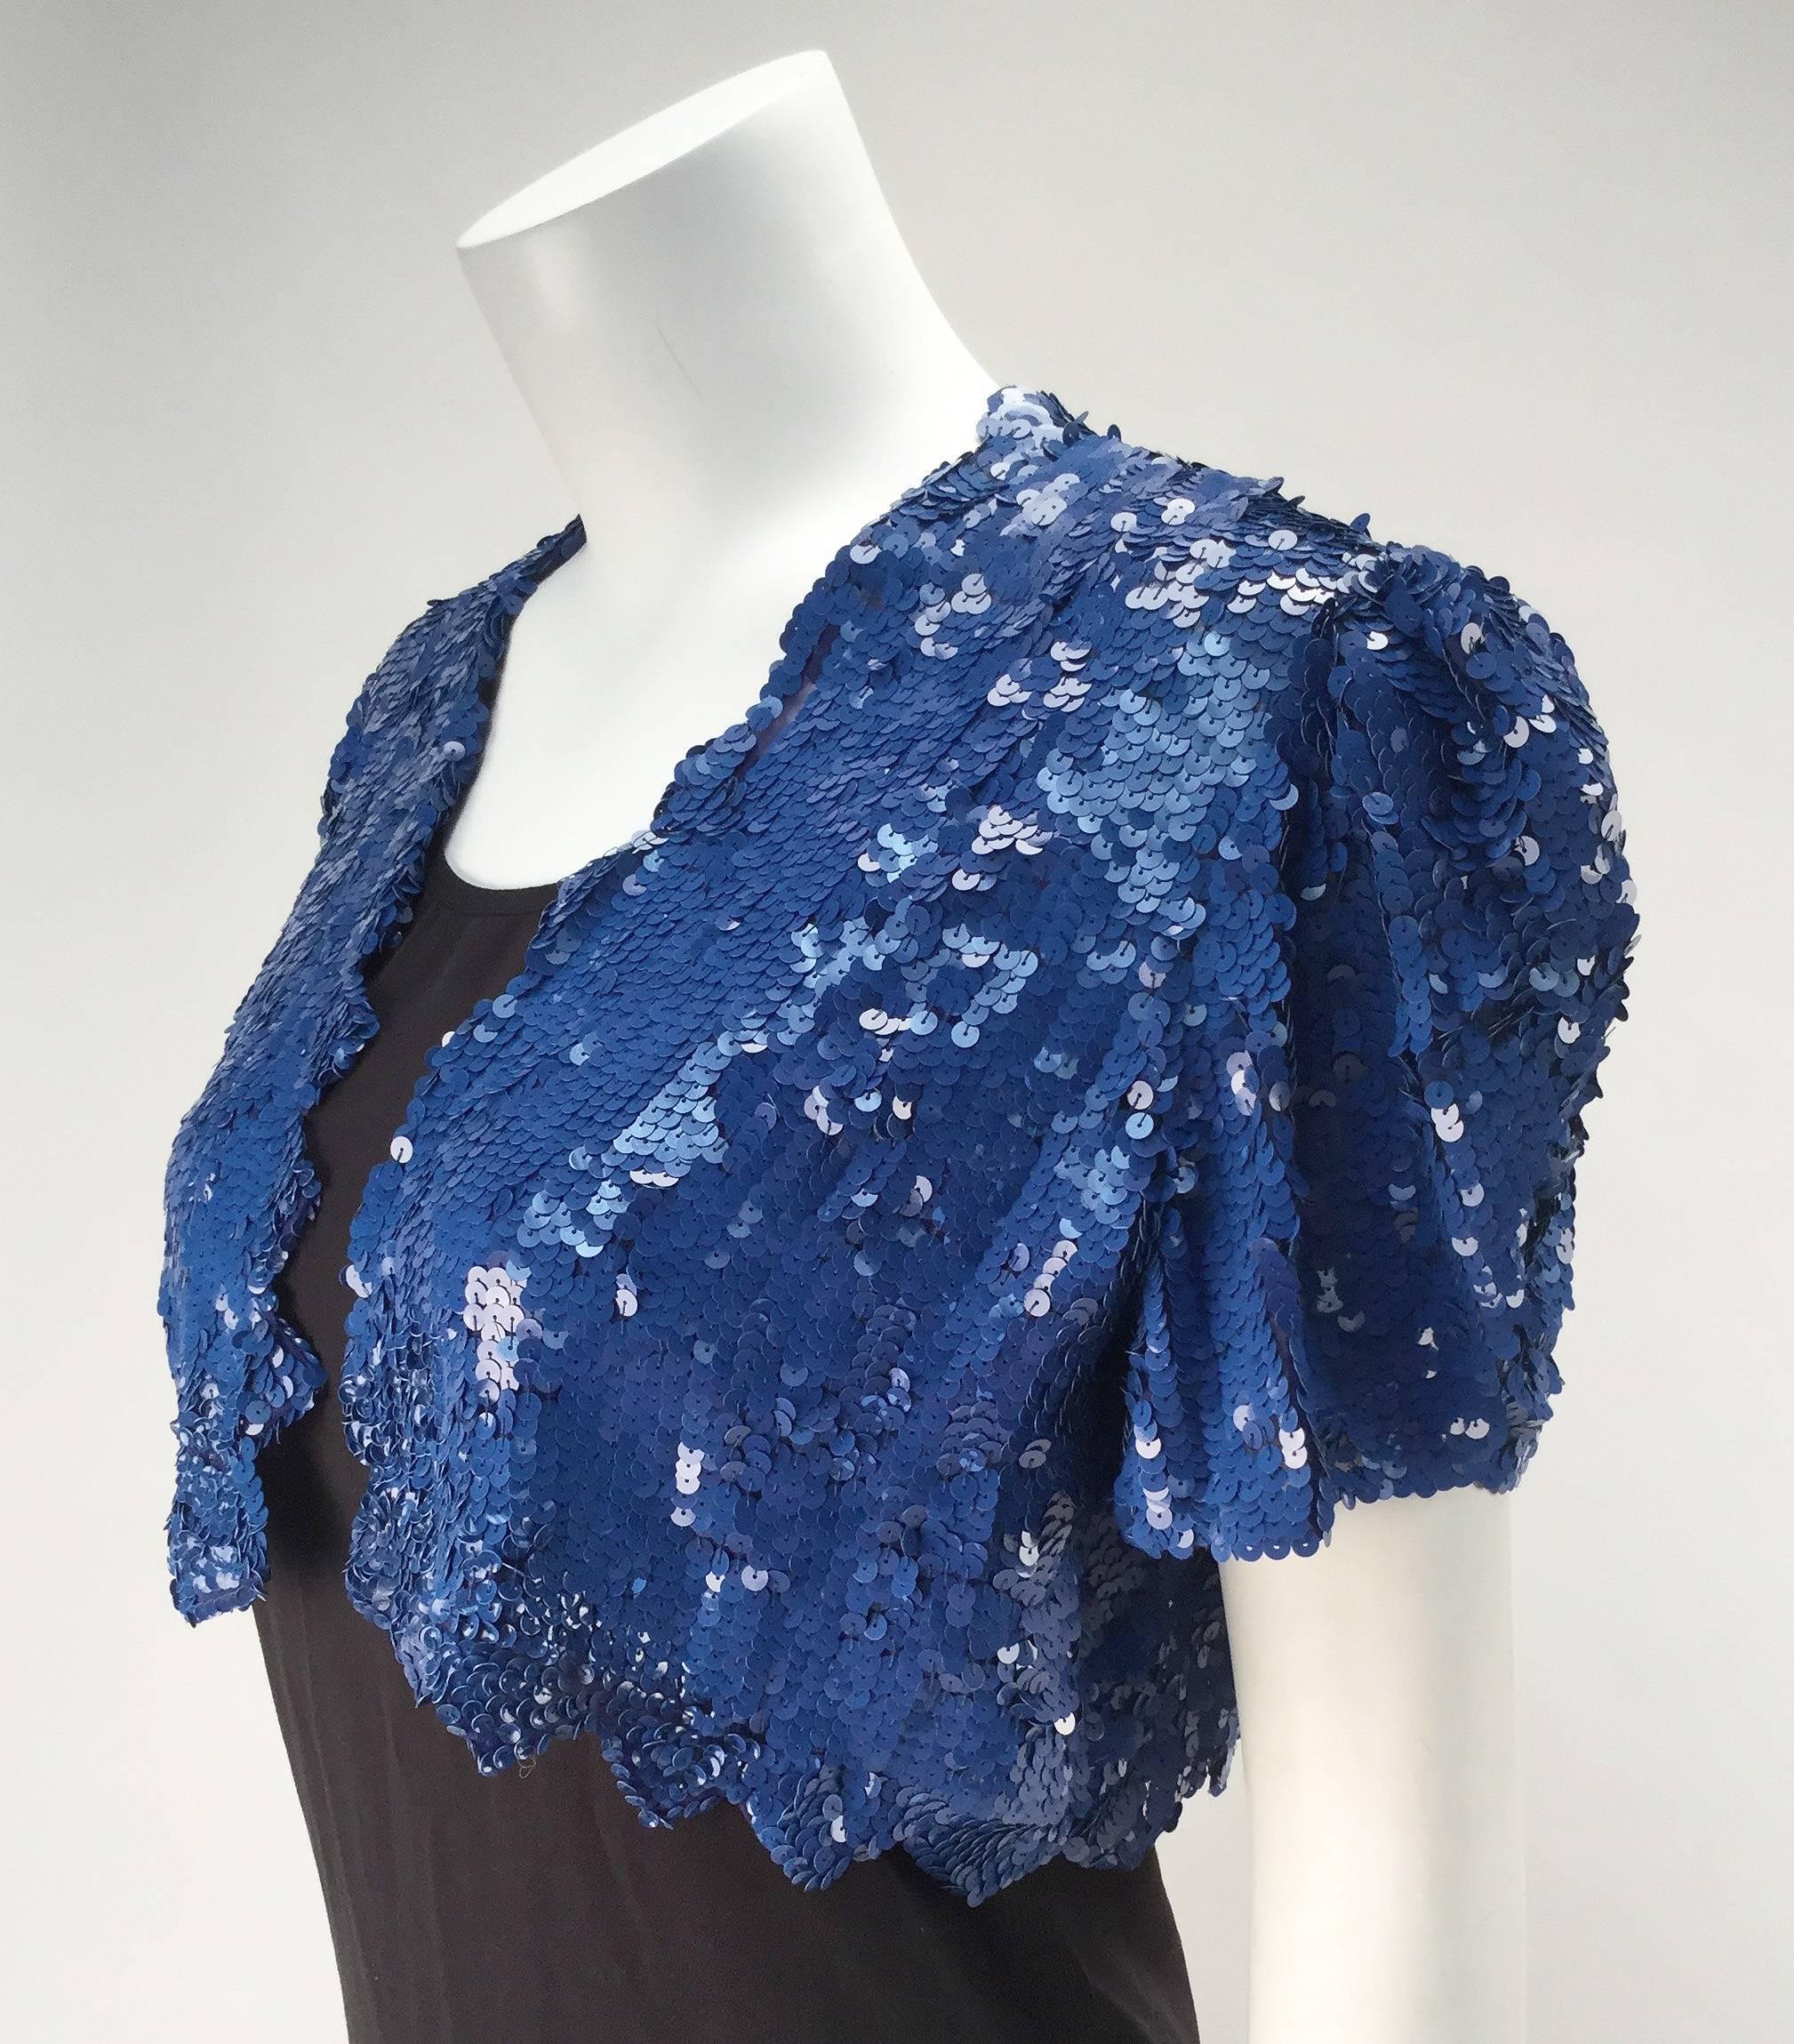 Wonderful vintage short sleeve bolero with blue sequins. Dress it up or dress it down... just dress in it!  This piece is absolutely fantastic!!!!

Our staff is arguing about whether it looks best over our black Norma Kamali jumpsuit or with a